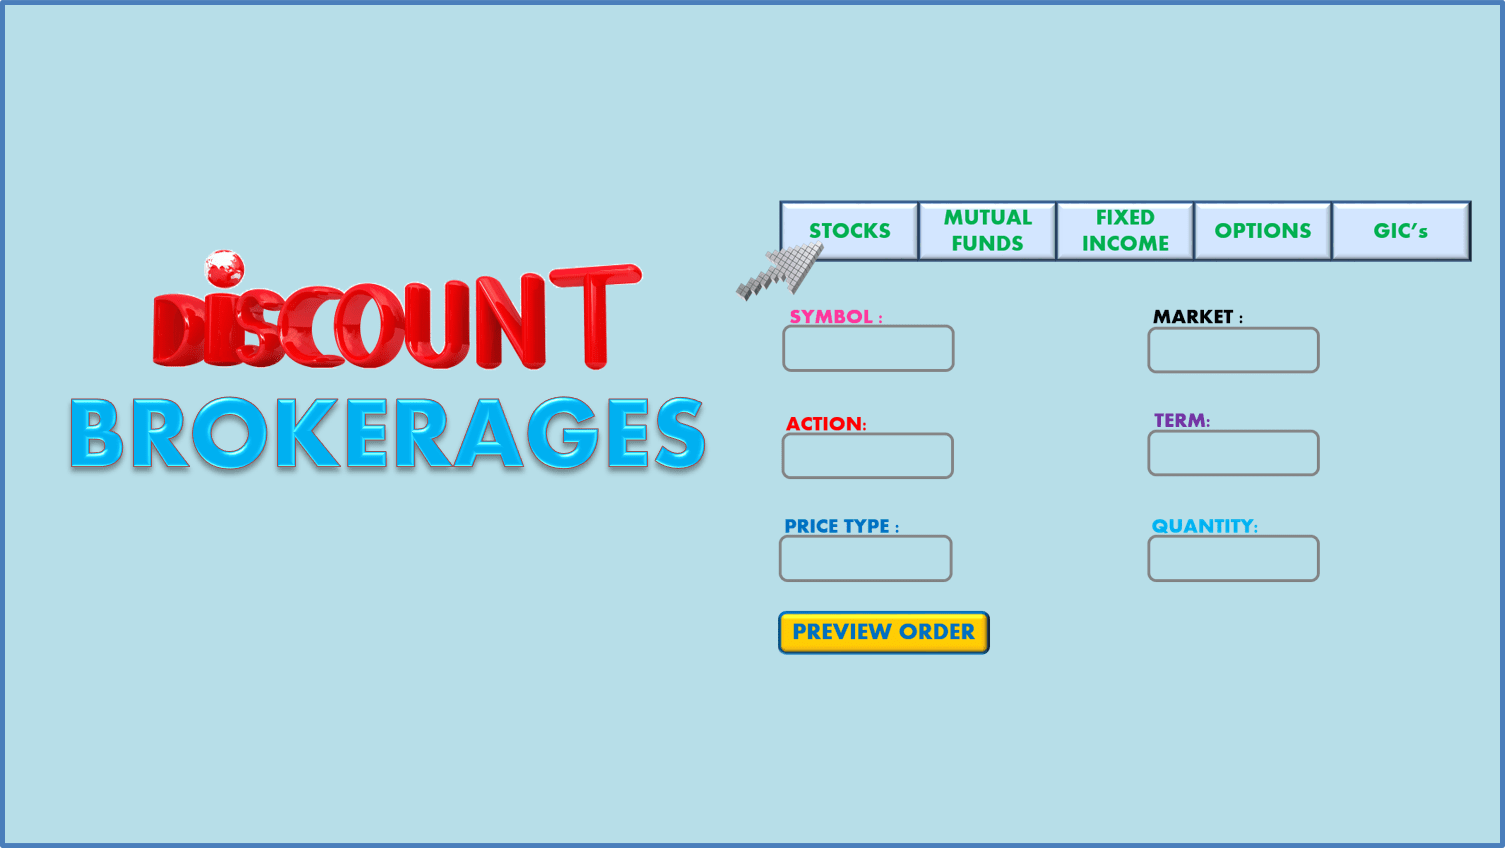 DISCOUNT BROKERAGES (ONLINE TRADING SYSTEM)